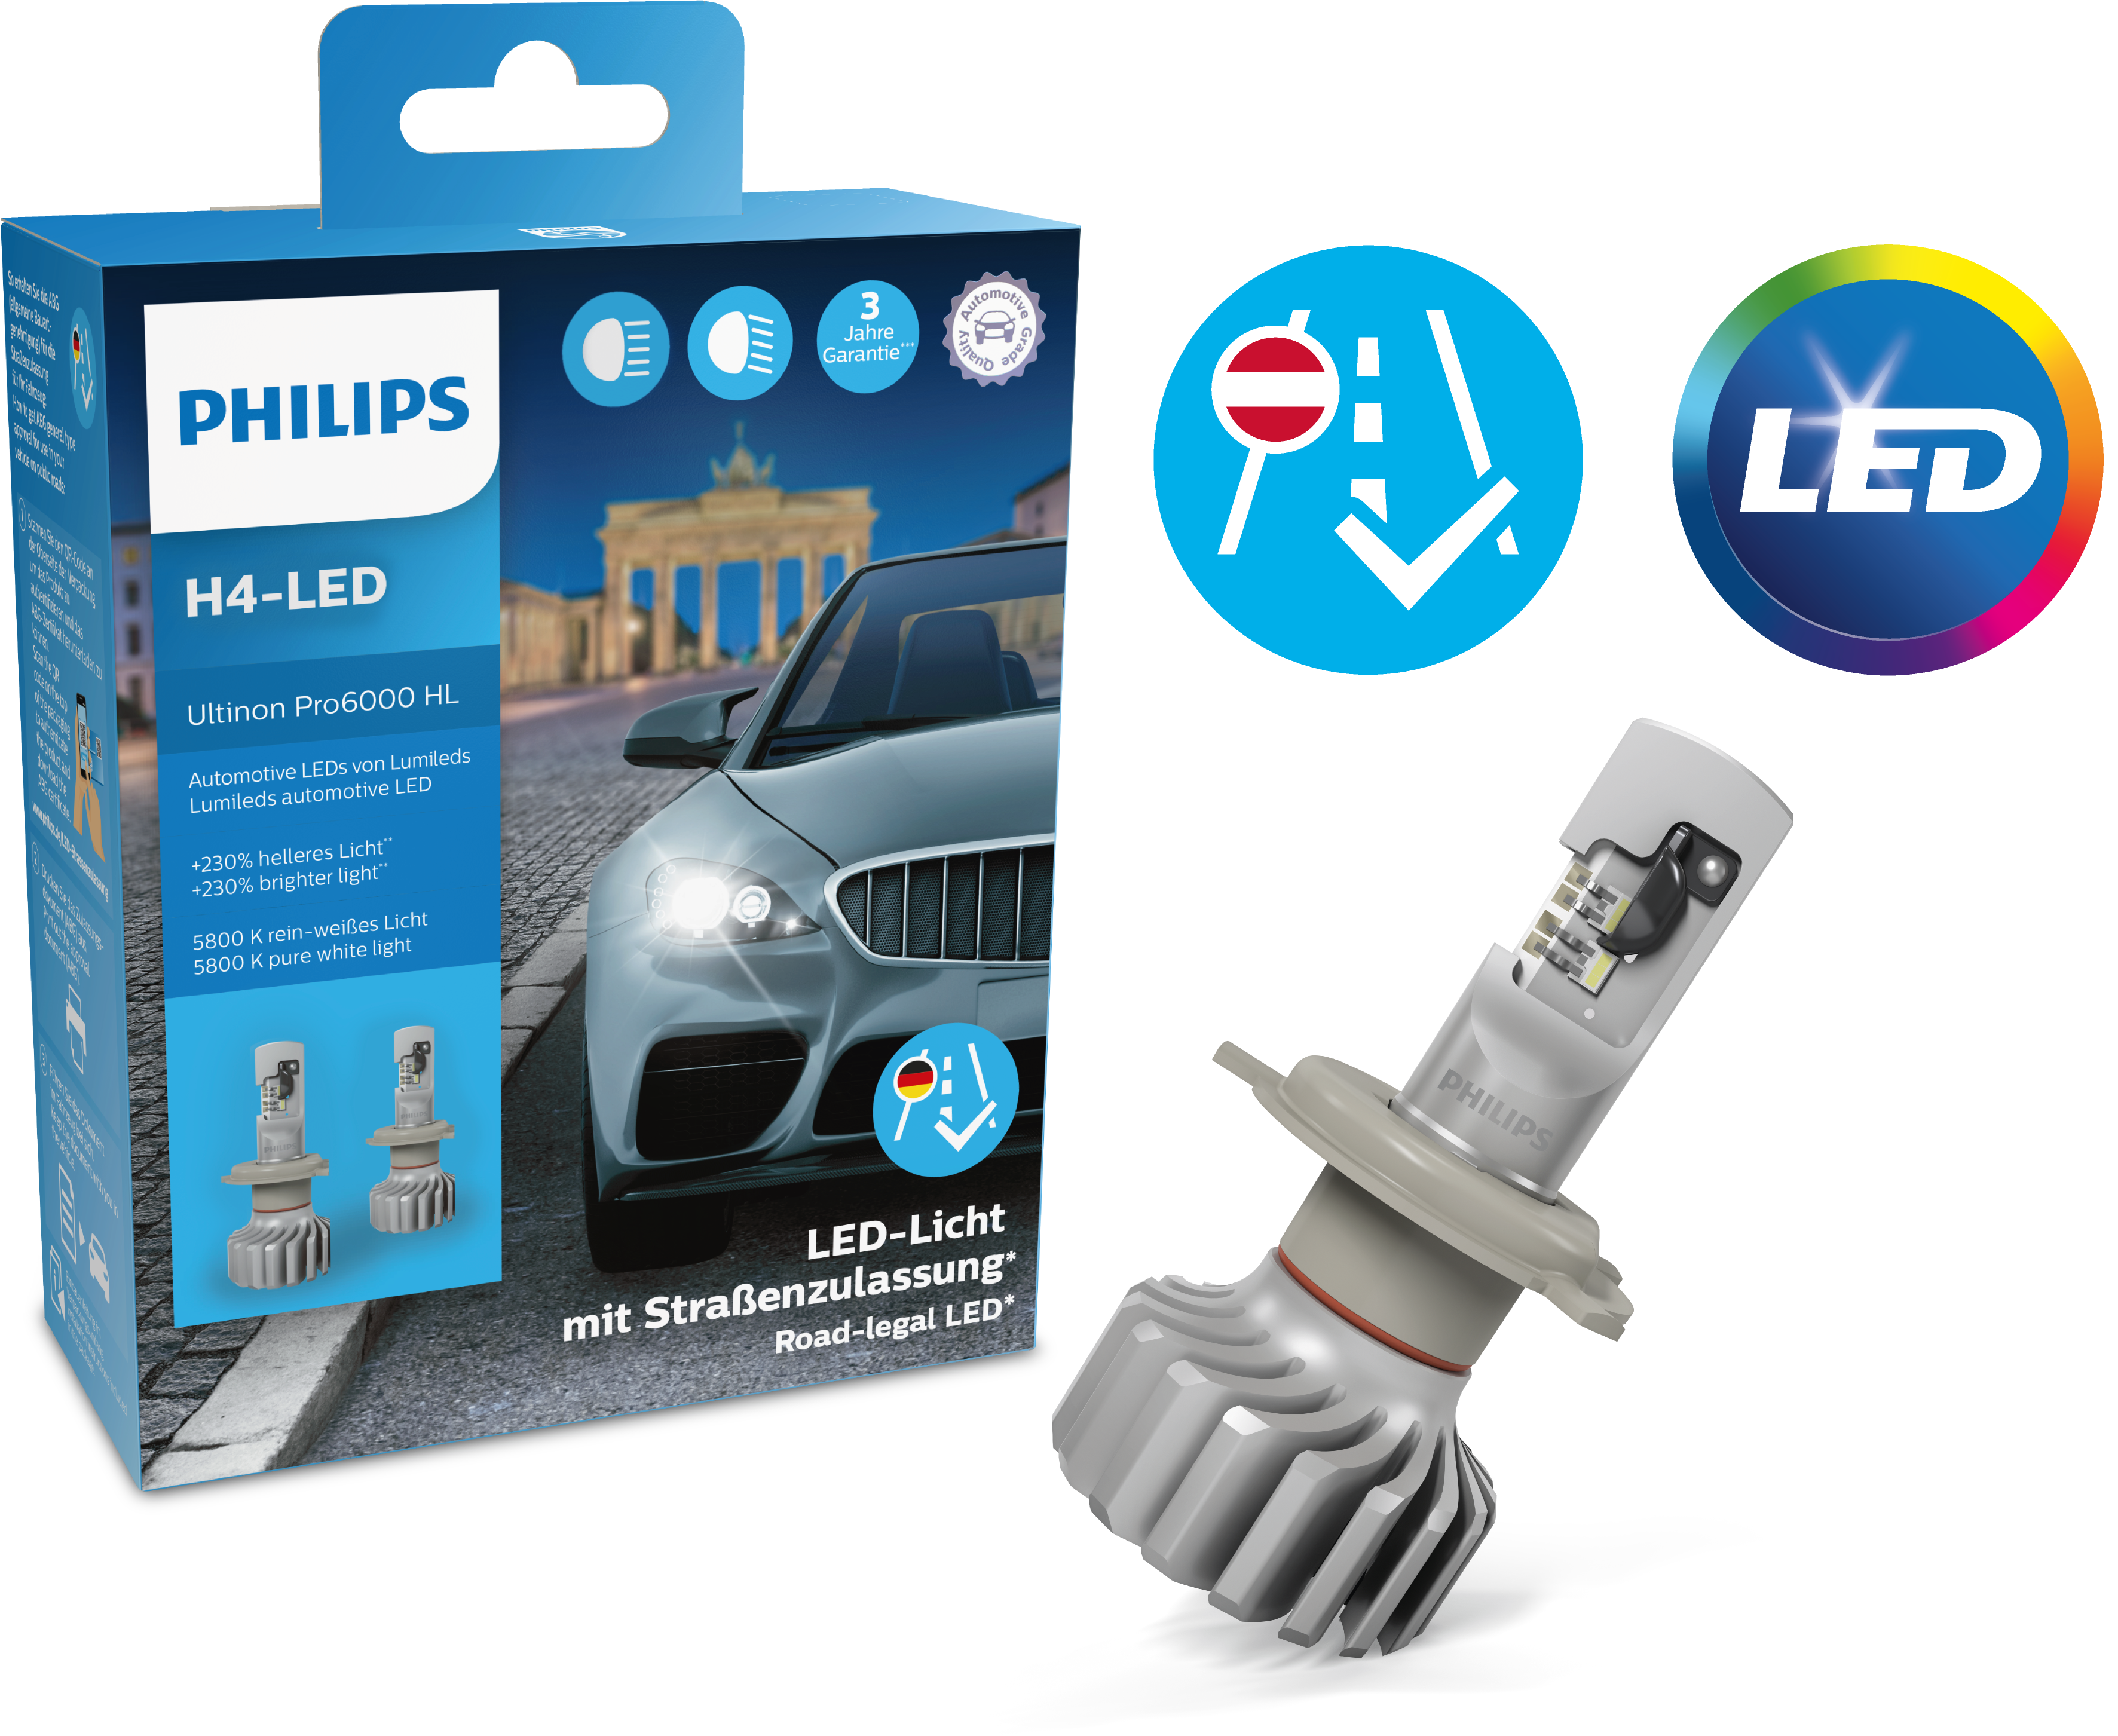 Philips Ultinon Pro6000 LED H7 - 100% legal - up to 230% more